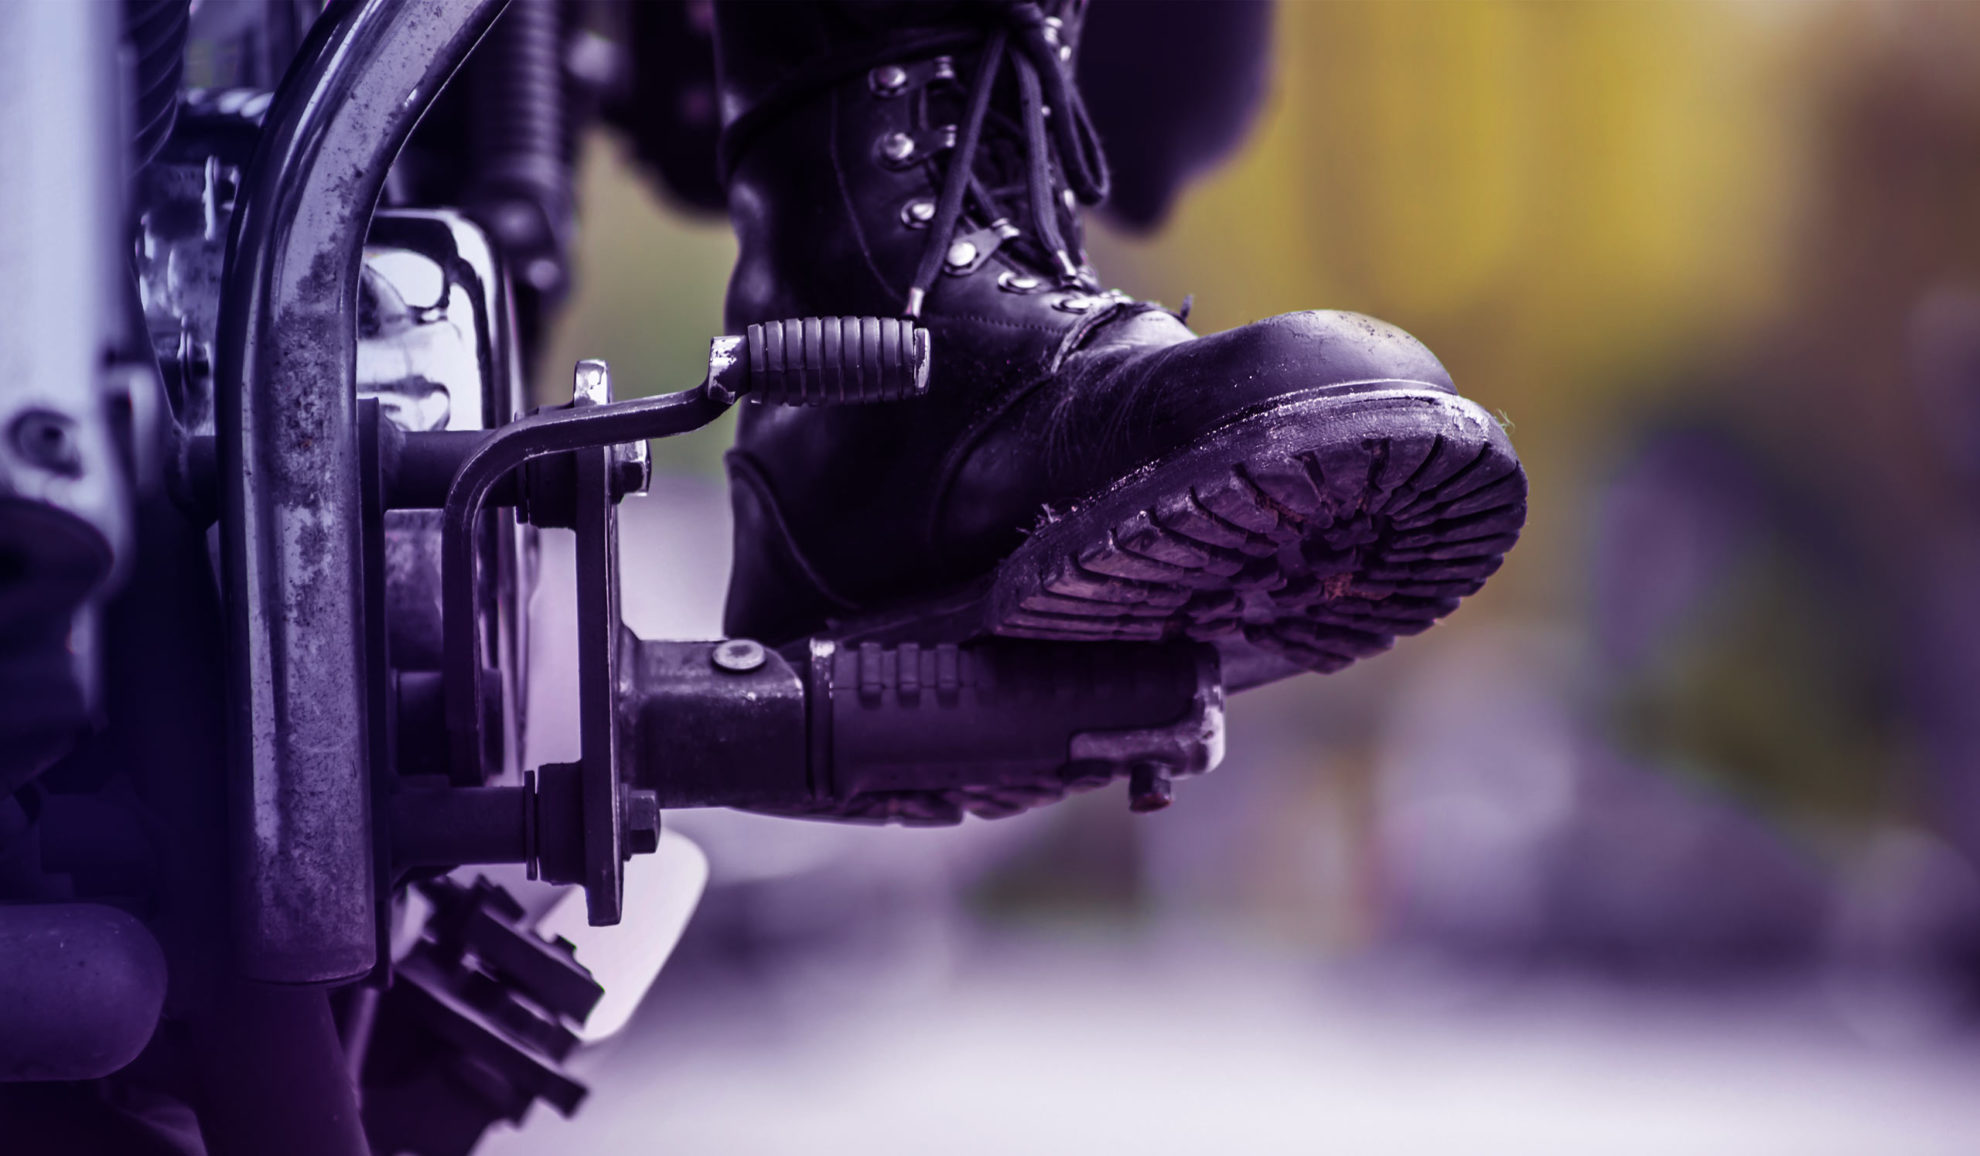 Member of the society riding a motorcycle boot close up